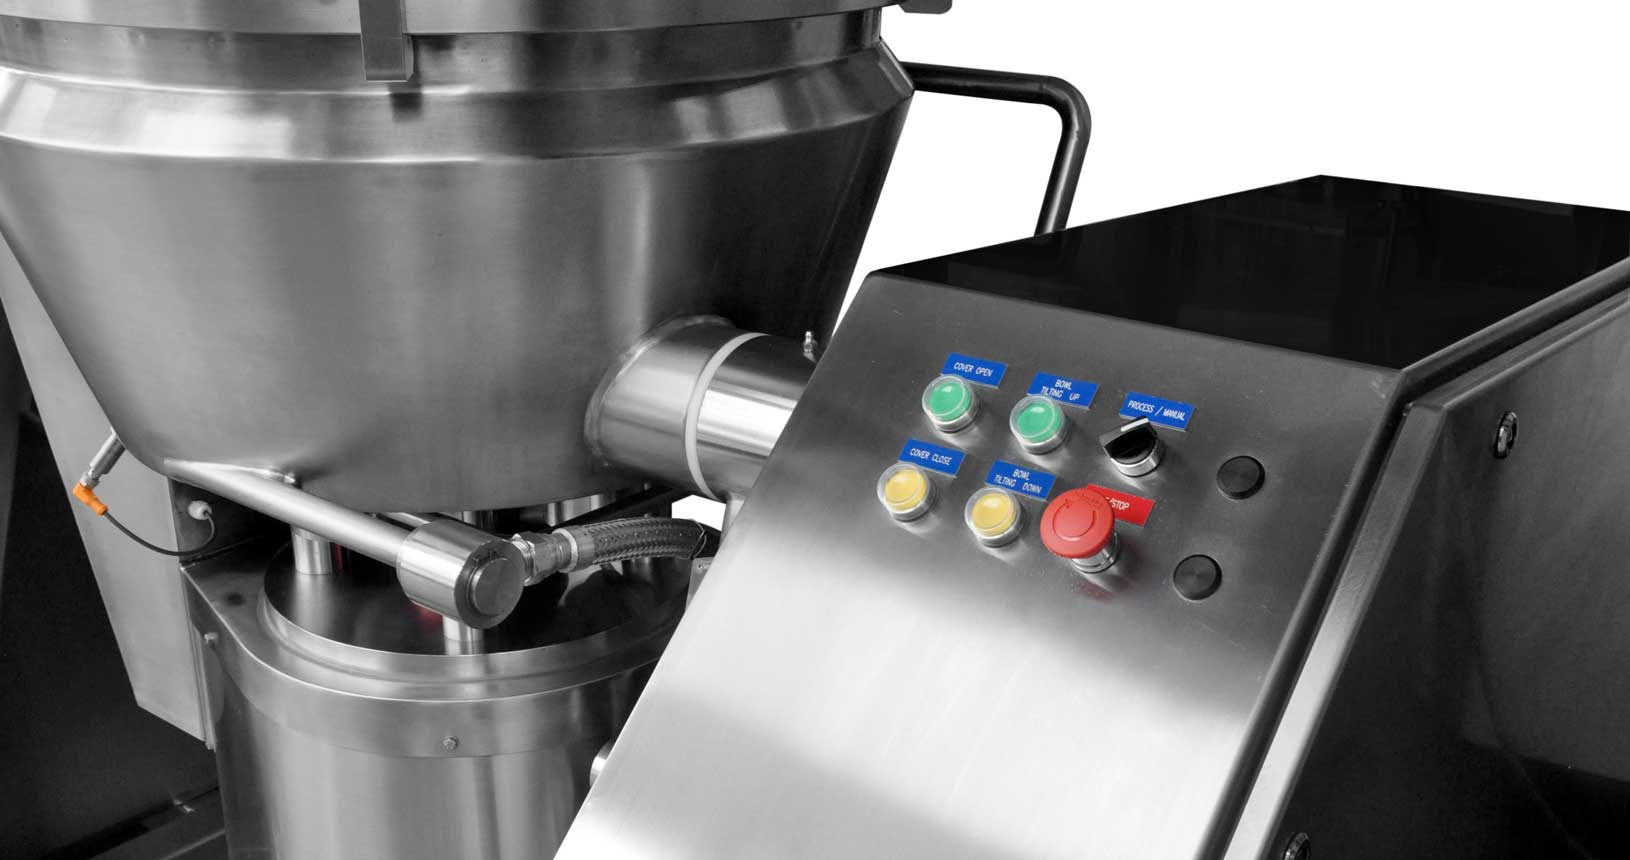 Controls for the Multi Function Steam Cooker 90